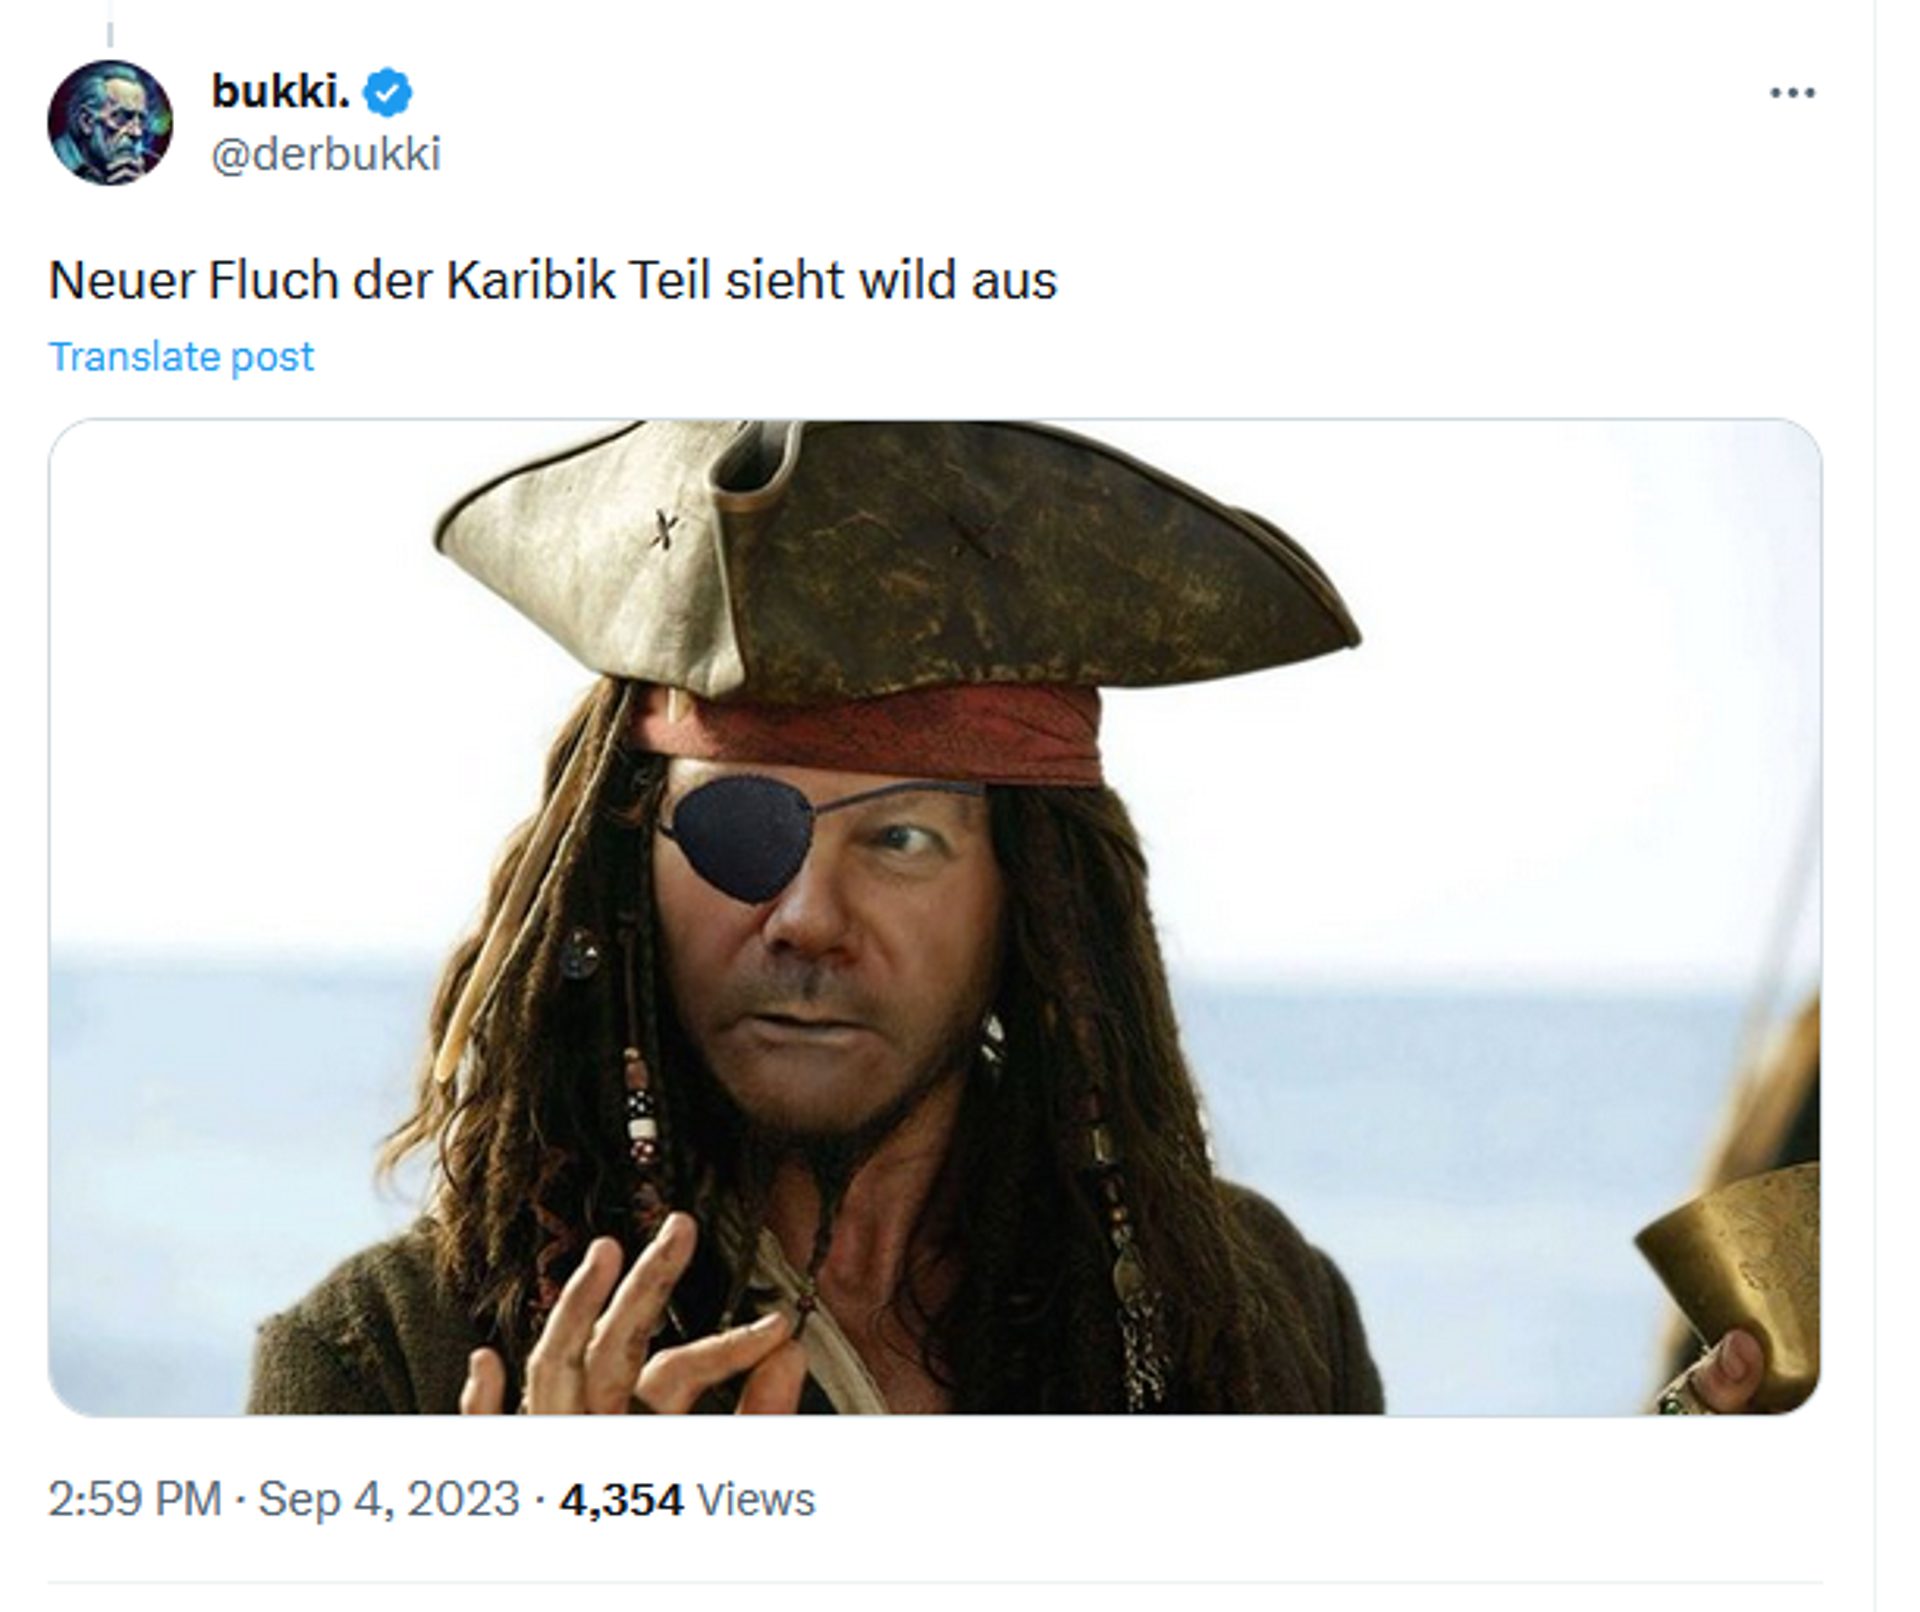 The new Pirates of the Caribbean looks wild. Meme featuring eyepatch-clad German Chancellor Olaf Scholz. - Sputnik International, 1920, 04.09.2023